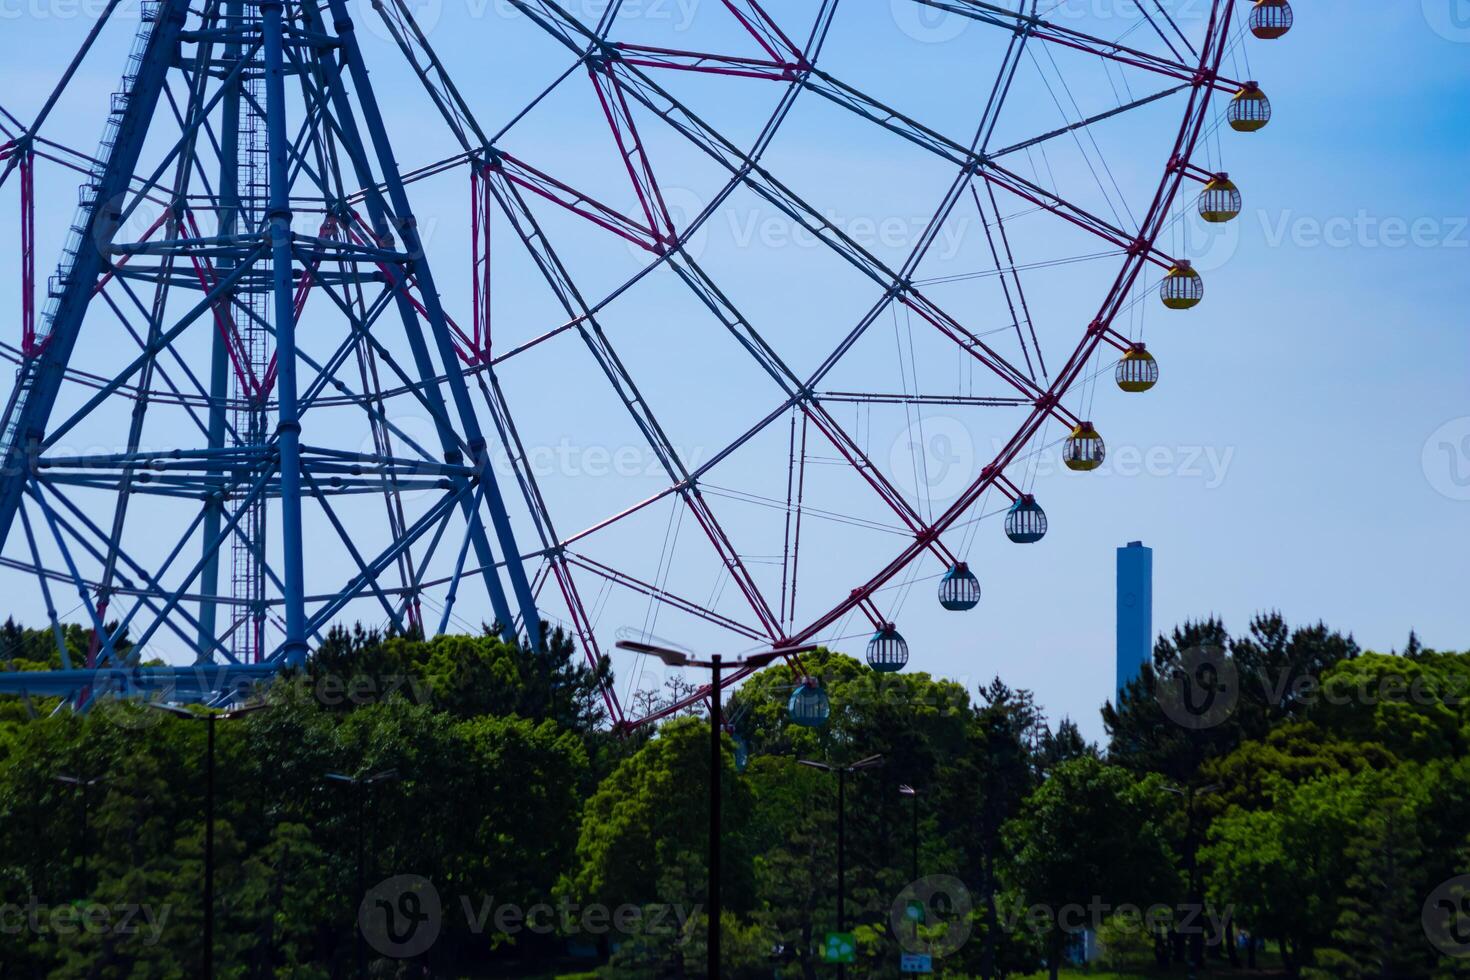 A ferris wheel at the park behind the blue sky telephoto shot photo